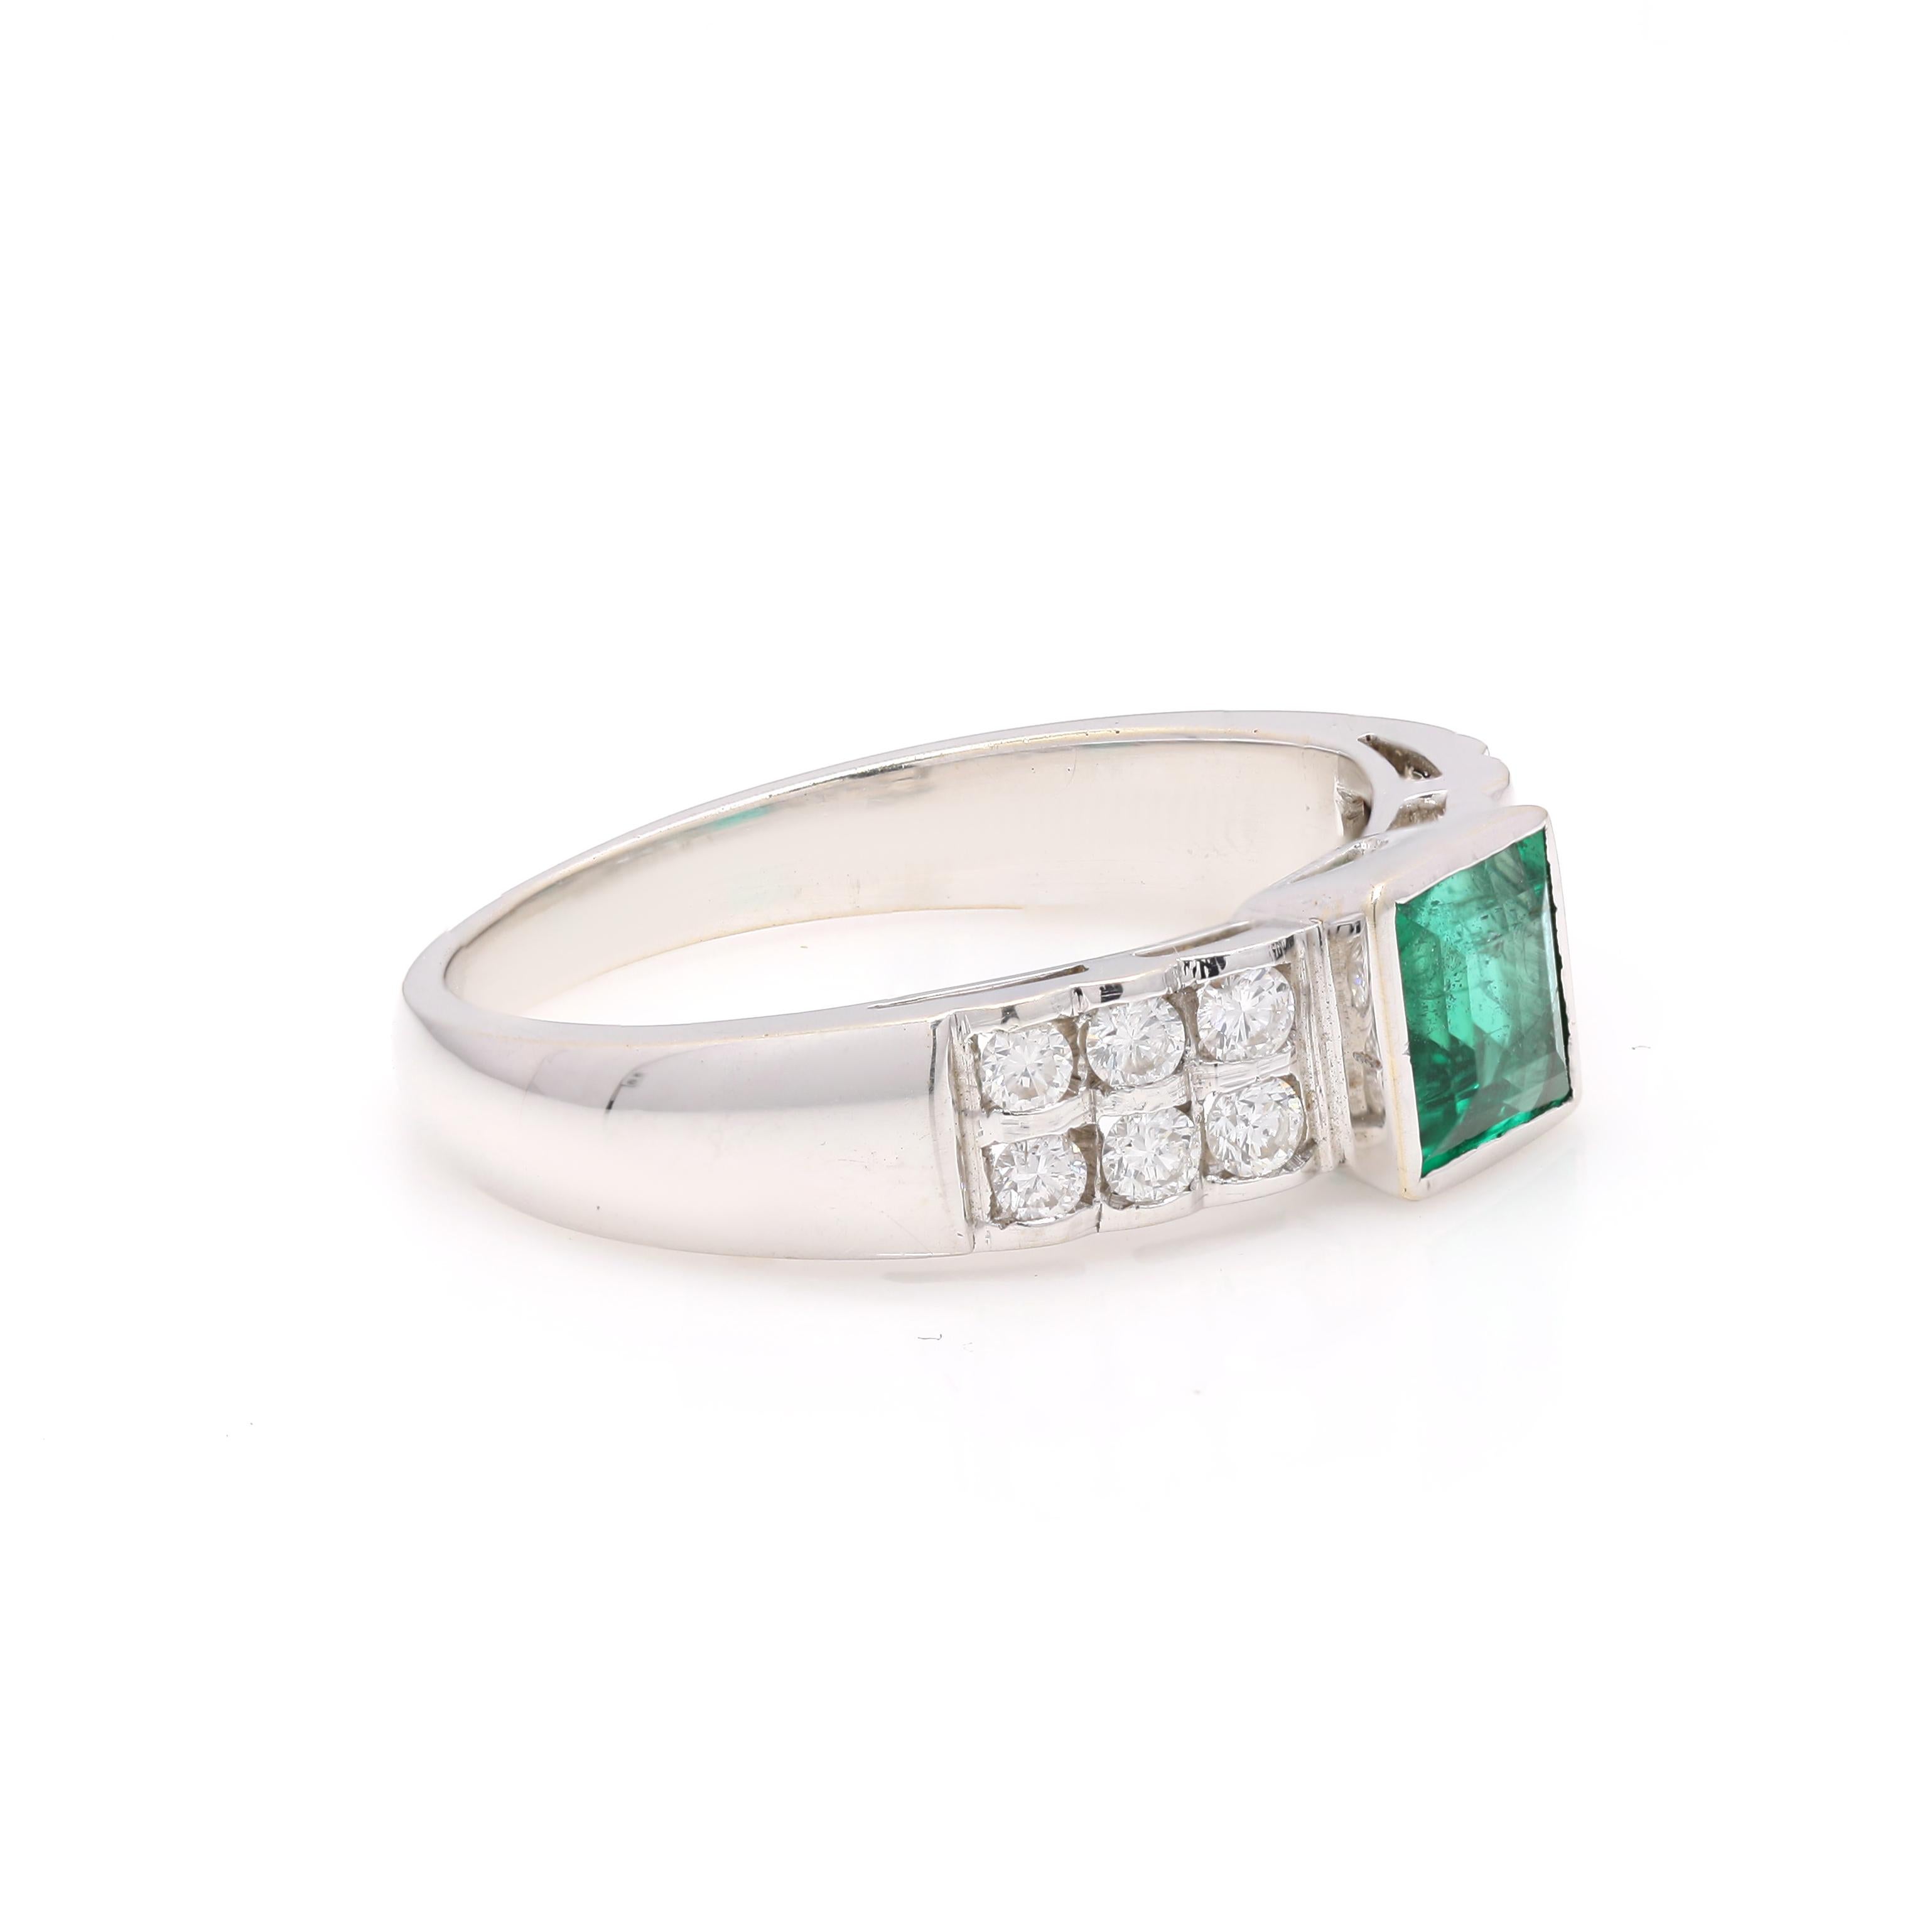 For Sale:  Unisex Diamond and Natural Emerald Engagement Band Ring in 18k White Gold 2